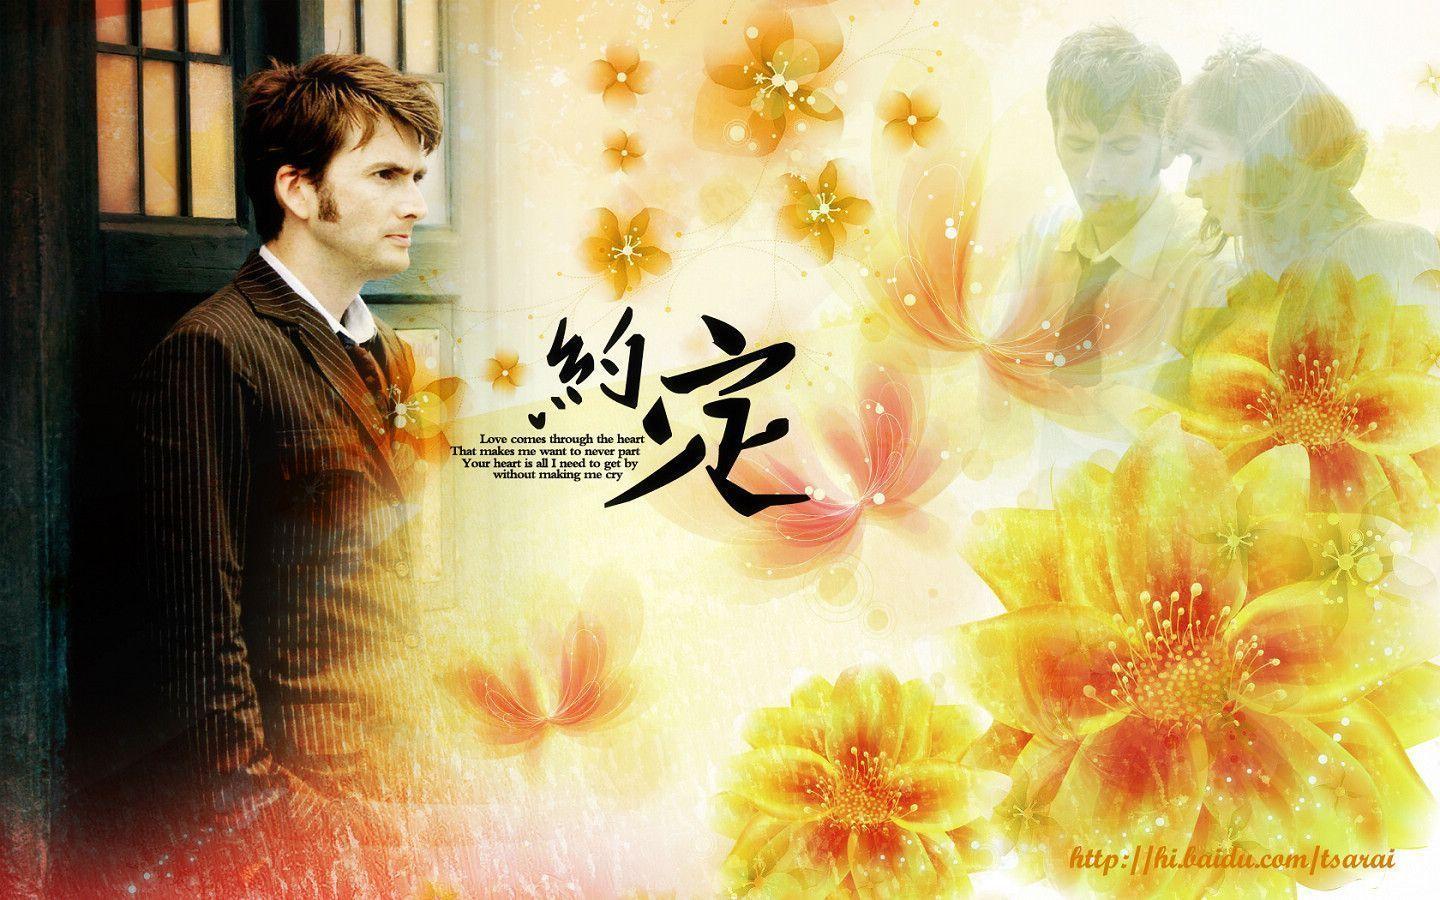 DOCTOR WHO Tennant Wallpaper